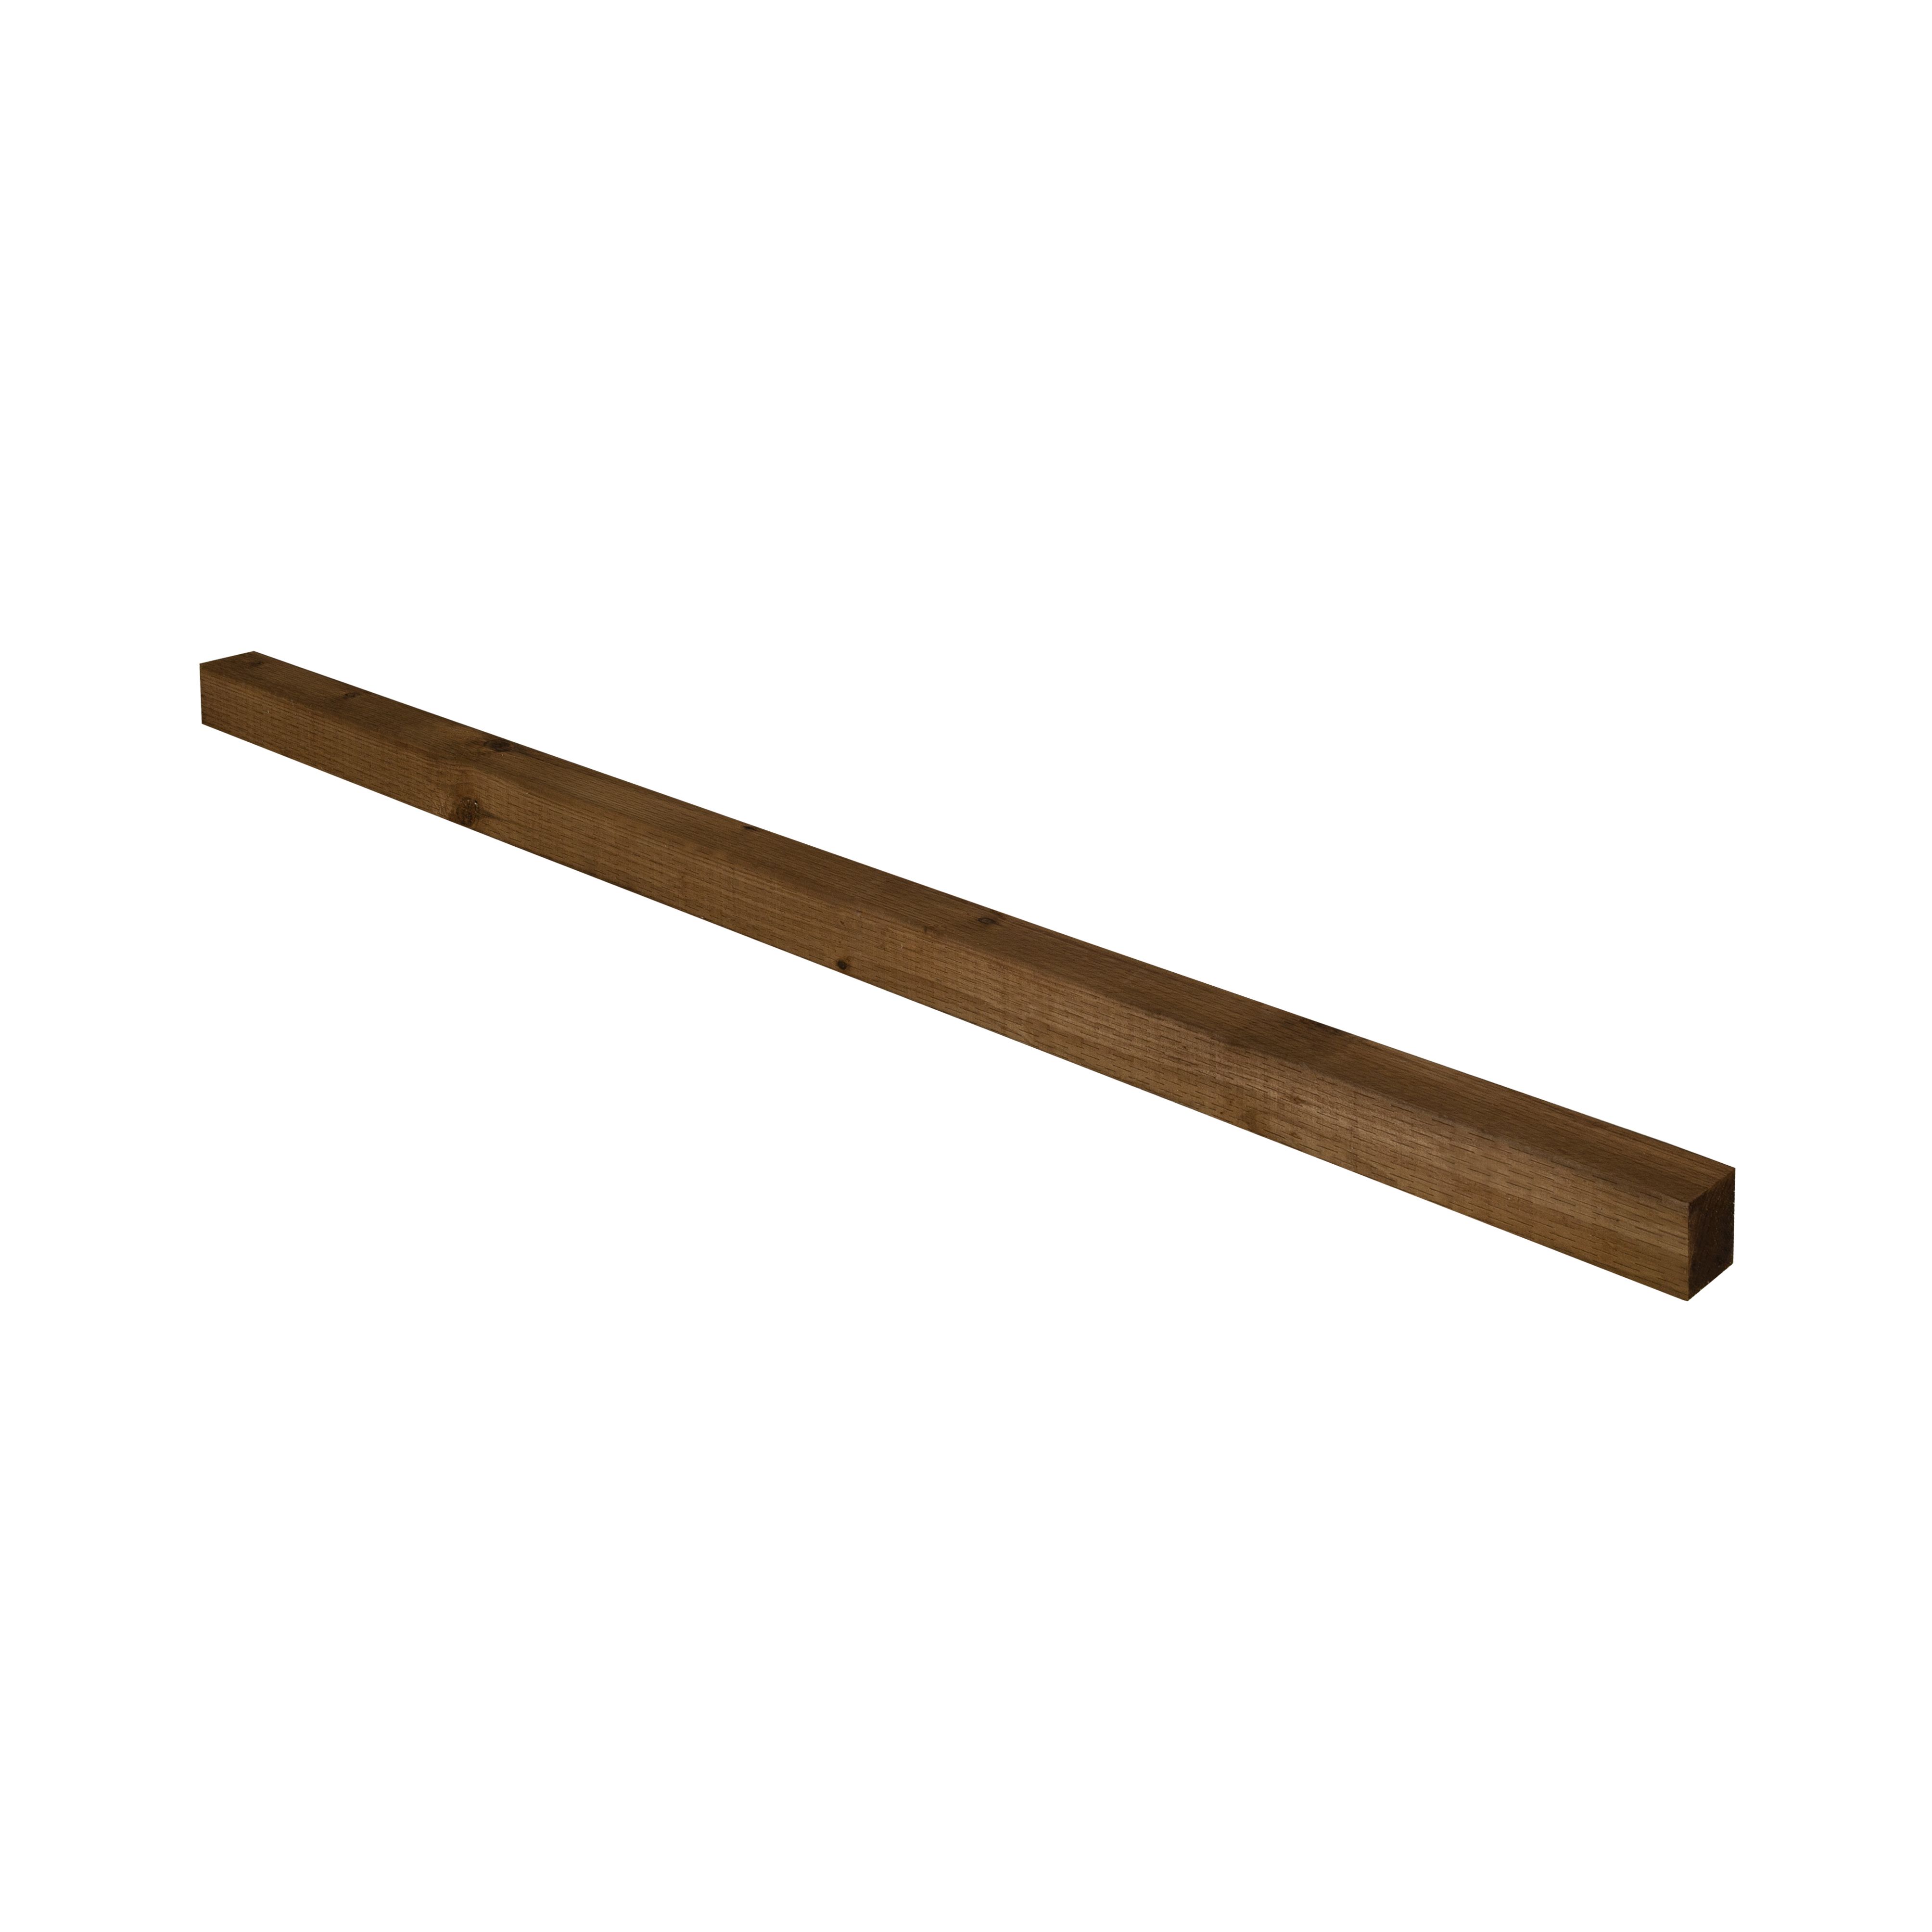 UC4 Brown Square Wooden Fence post (H)1.8m (W)75mm, Pack of 4